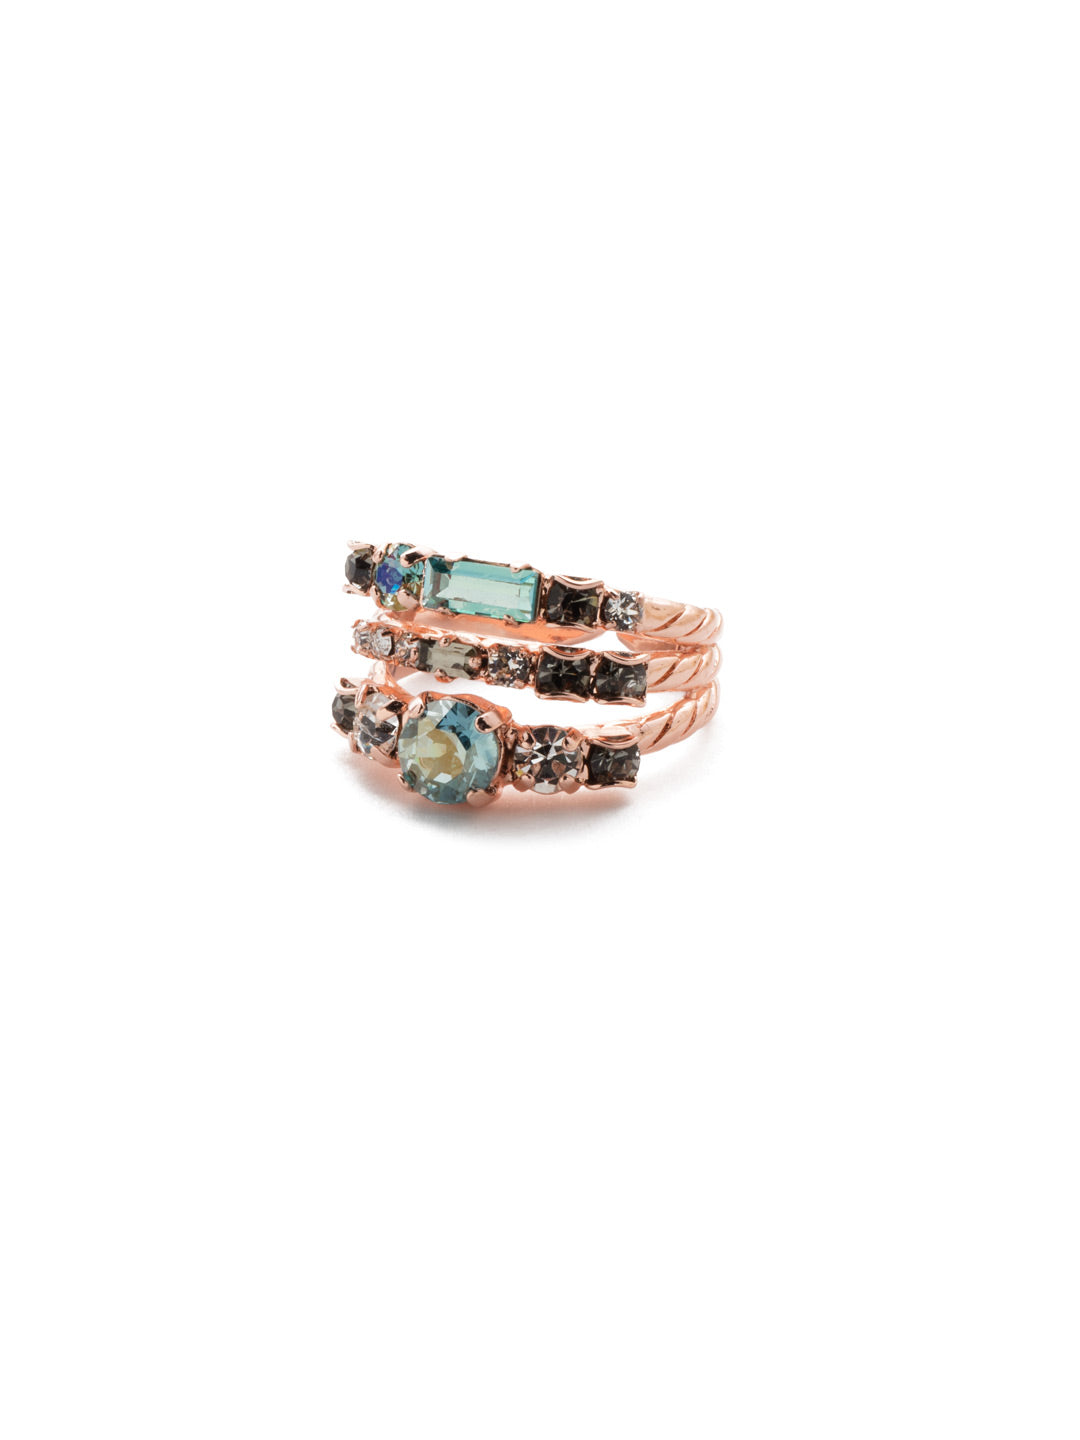 Triple Threat Stacked Ring - RDK23RGCAZ - Three rows of crystal encrusted bands are joined together for a stacked, stylish look. From Sorrelli's Crystal Azure collection in our Rose Gold-tone finish.